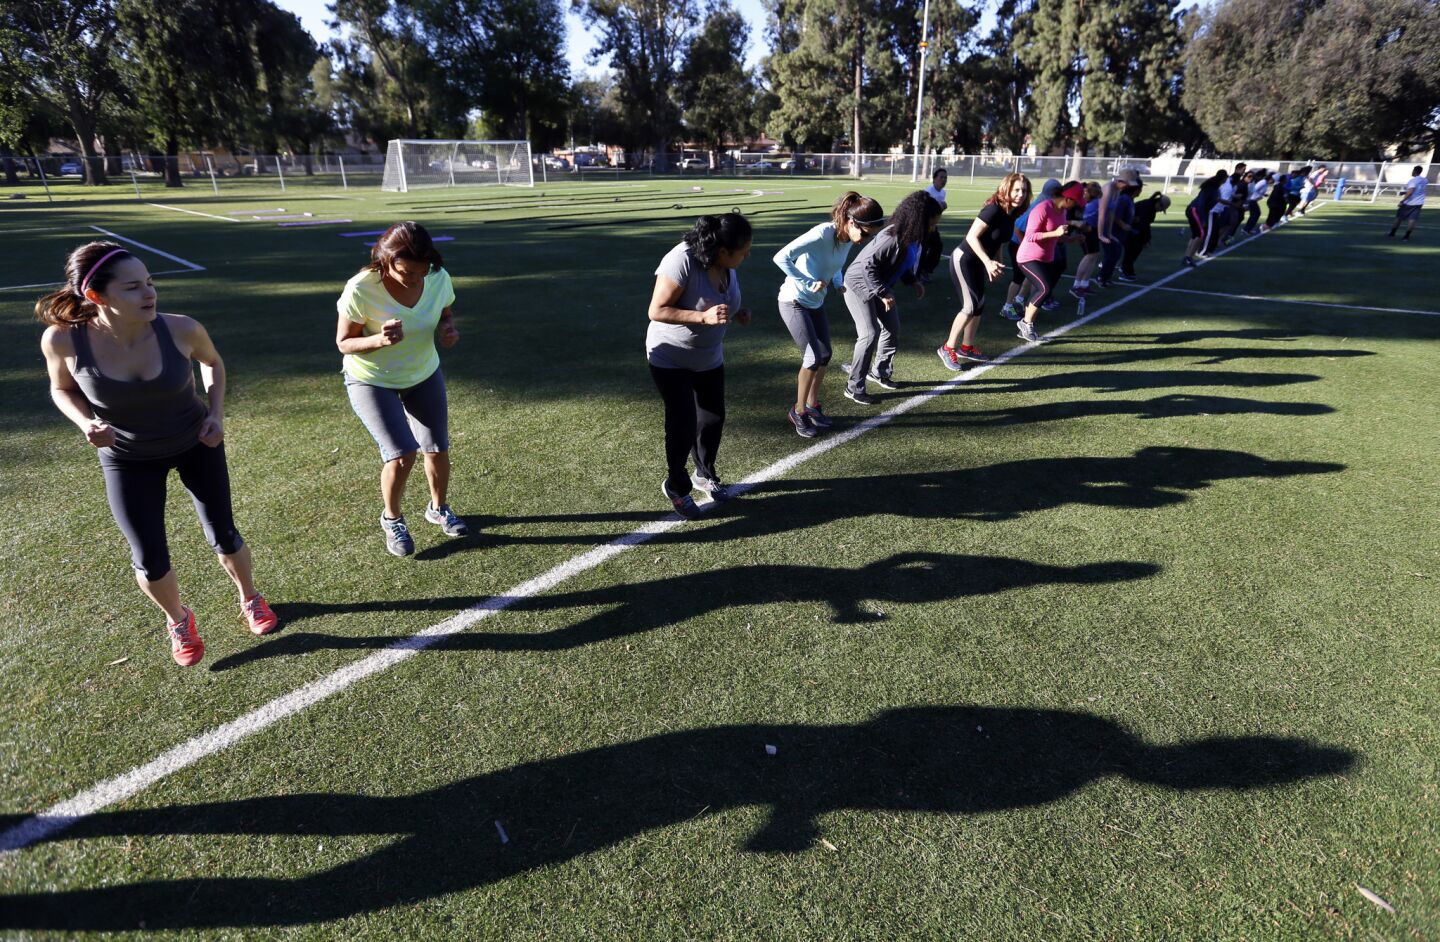 As a heat wave hits Southern California, students work out during an exercise class in Lanark Park.